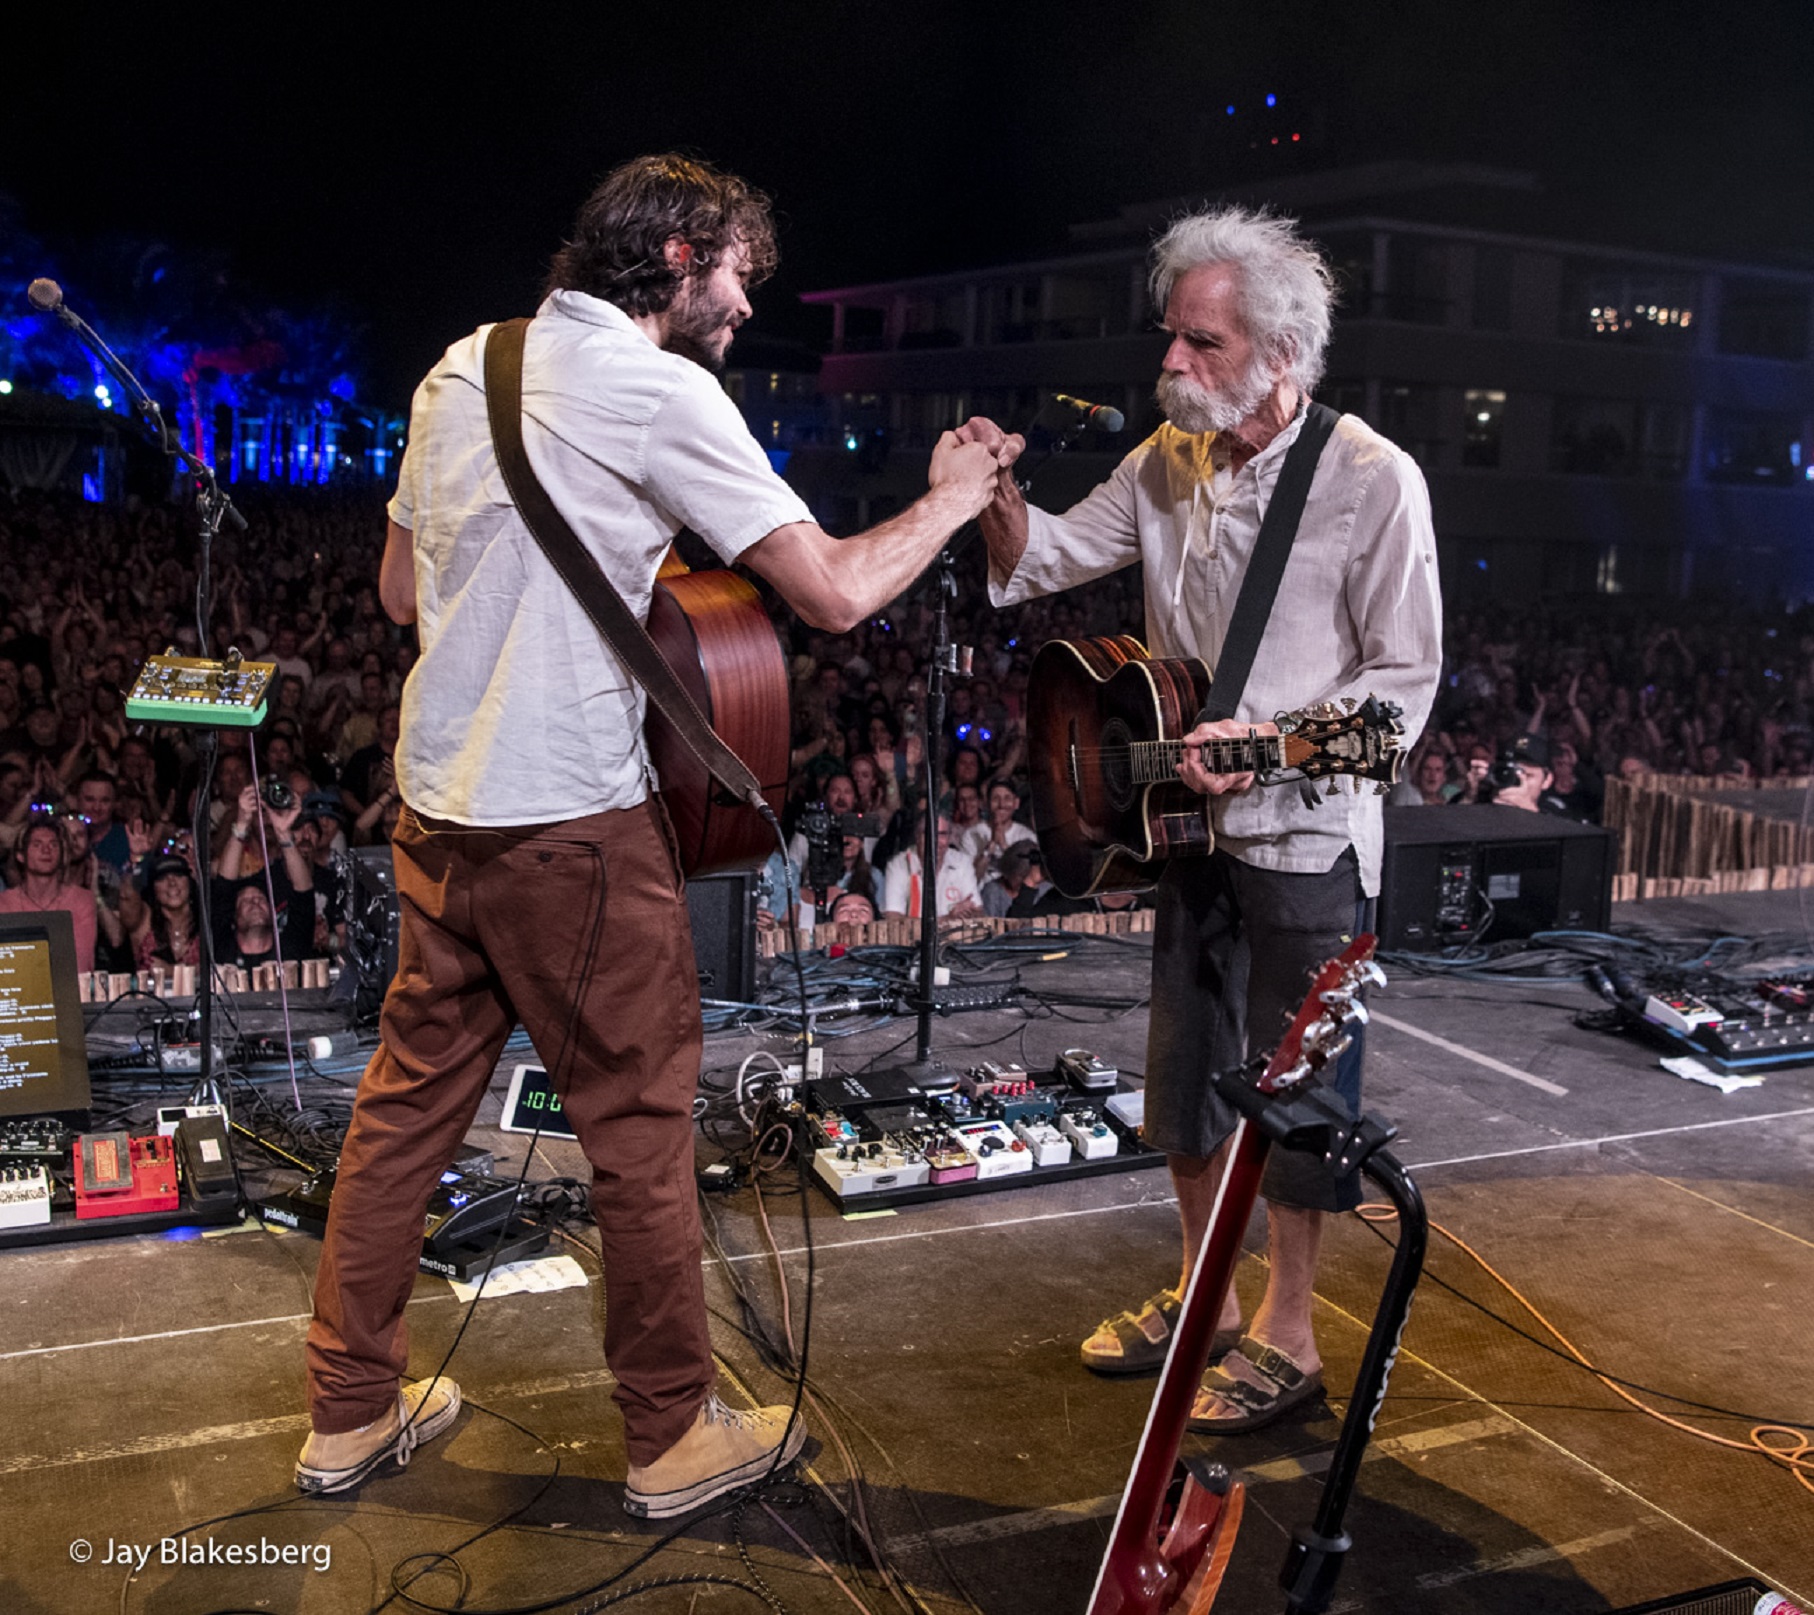 GOOSE JOINED BY LEGENDARY GRATEFUL DEAD GUITARIST BOB WEIR FOR TRIO OF SONGS DURING TWO-SET PLAYING IN THE SAND PERFORMANCE